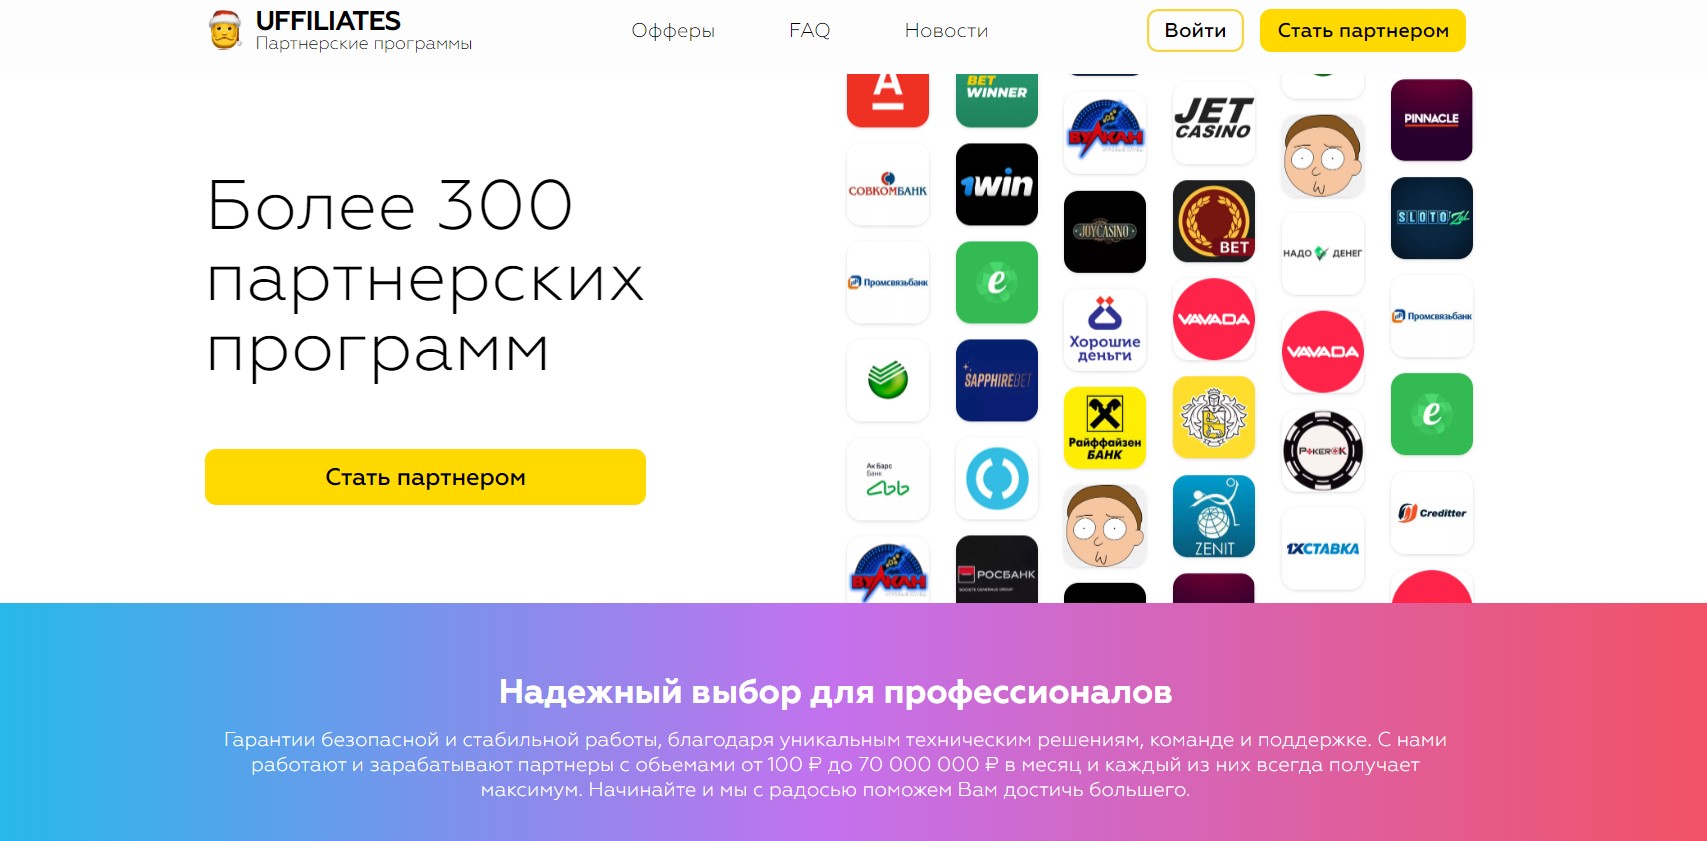 You Don't Have To Be A Big Corporation To Start Партнерская программа Betwinner